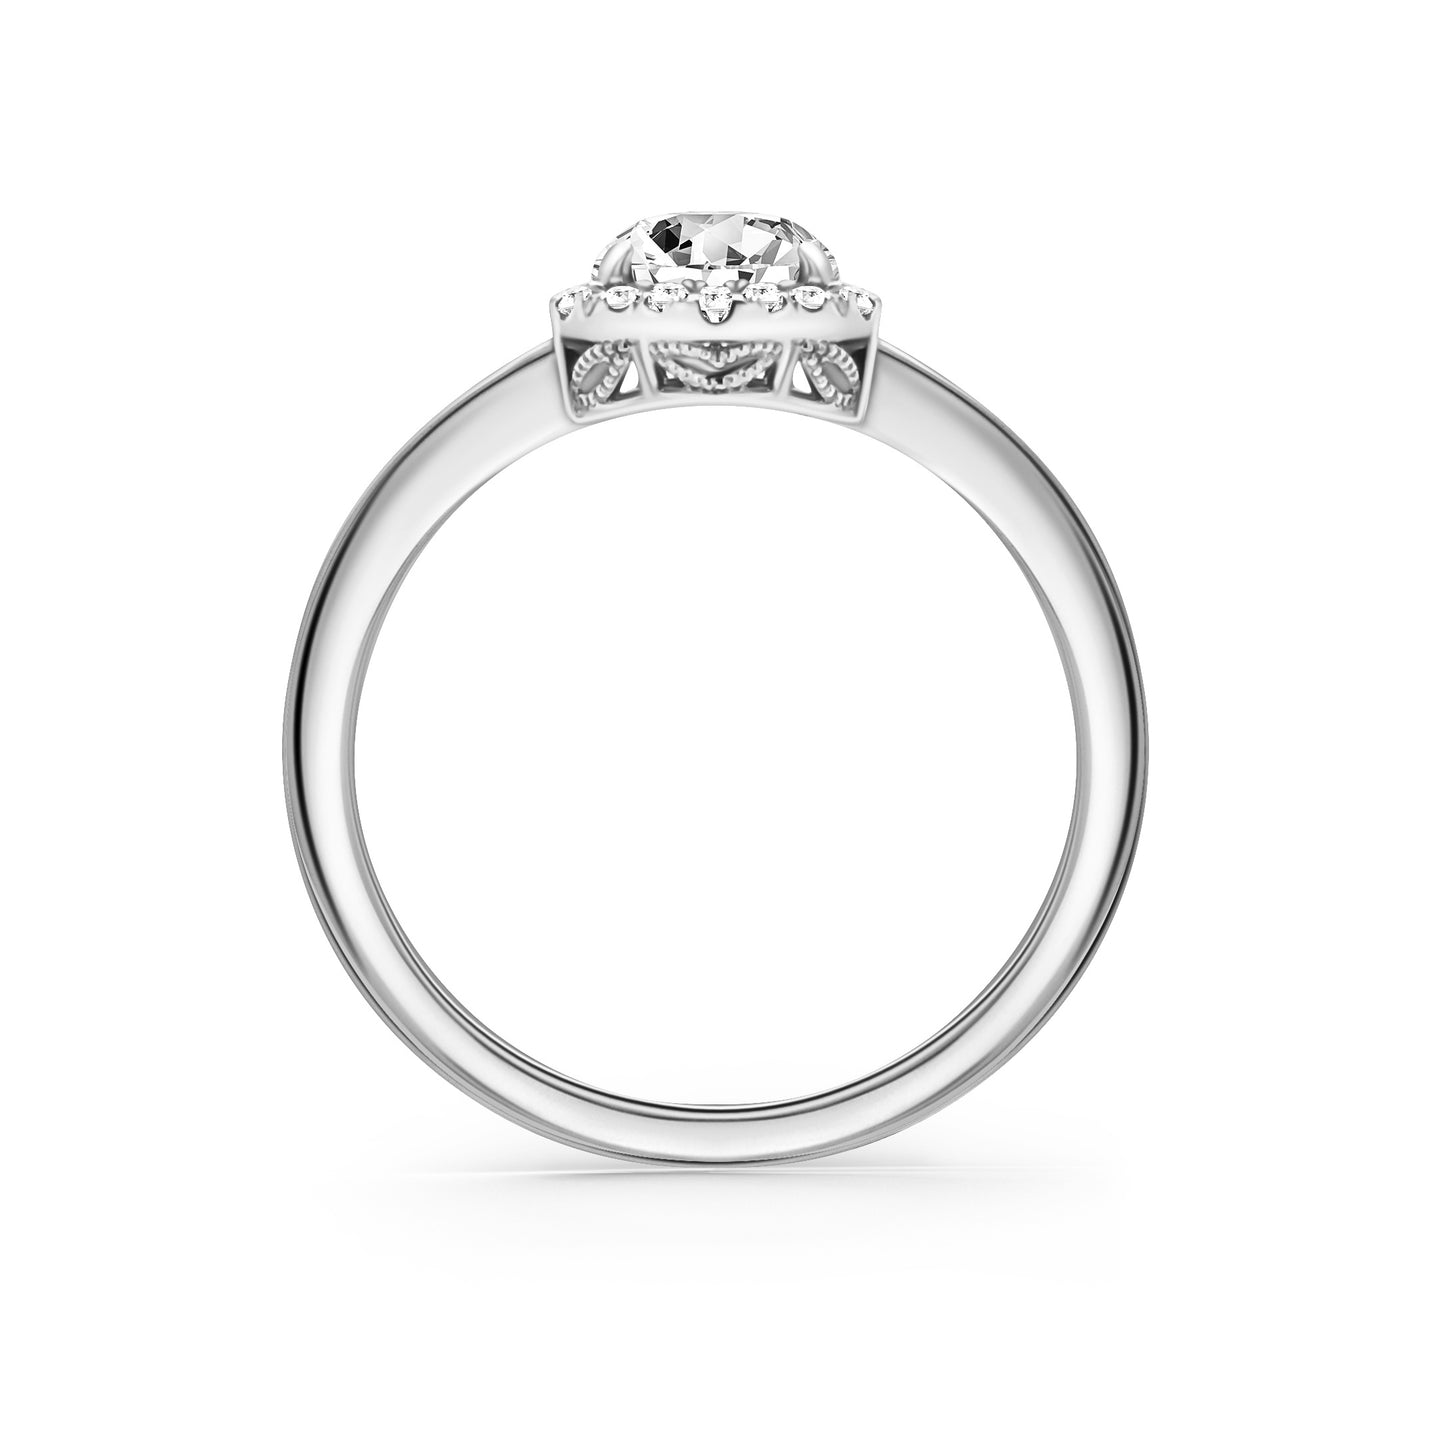 Floral Delicate Rose Cut Halo Diamond Engagement Ring